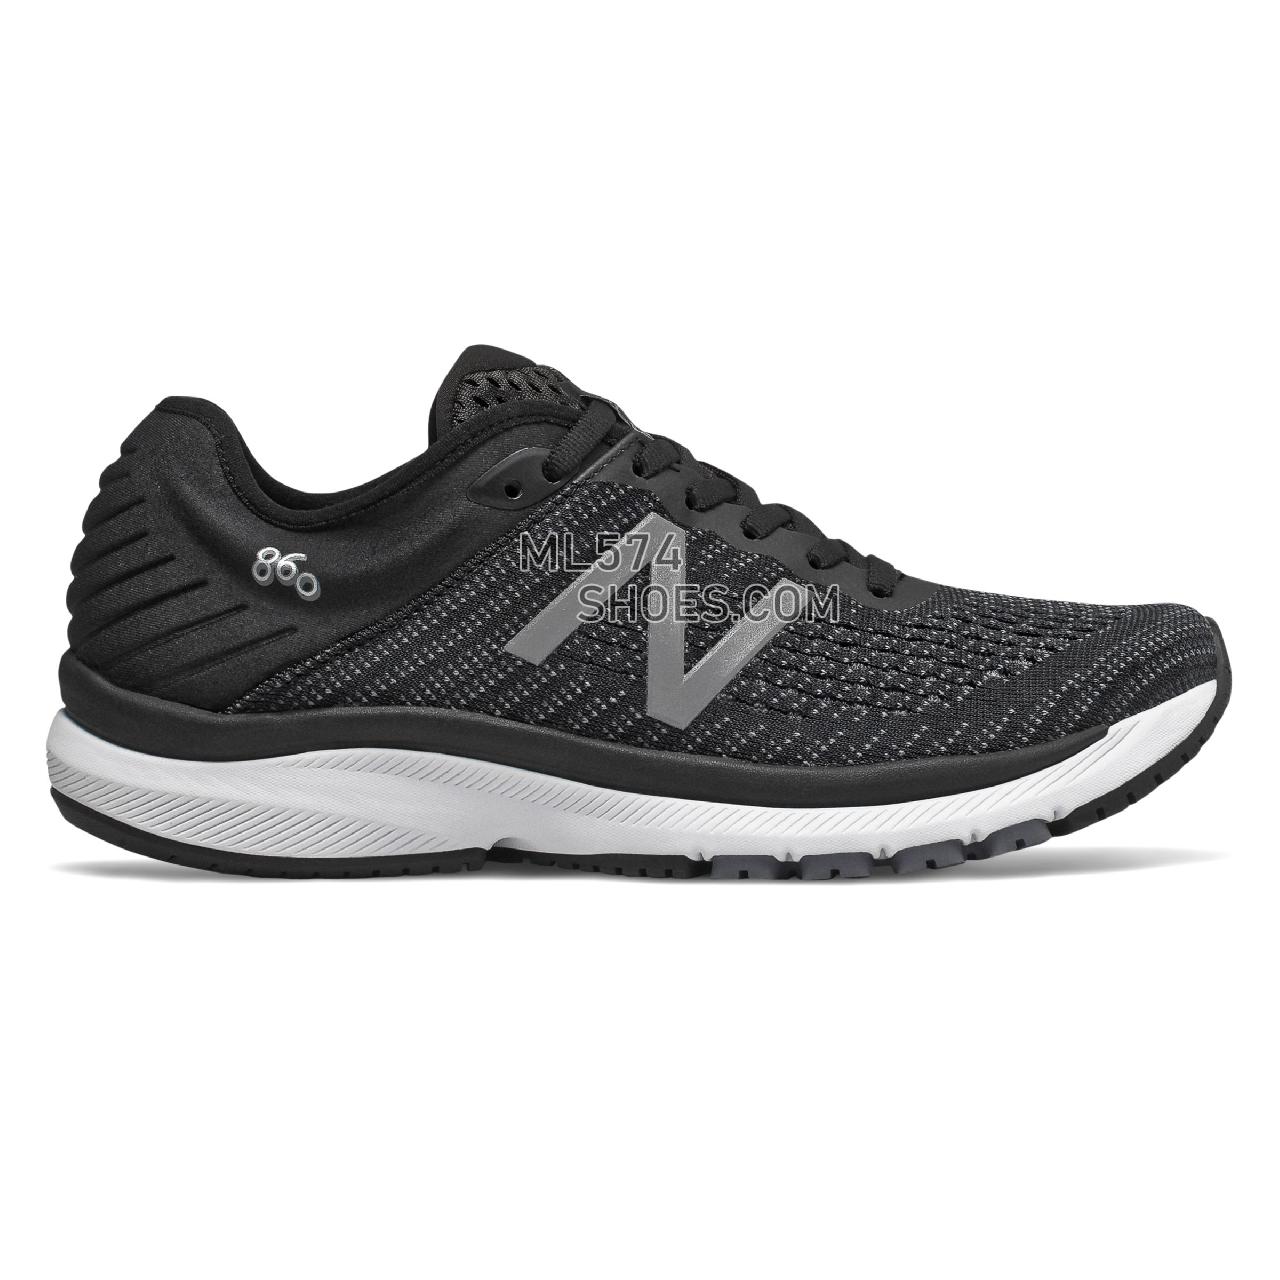 New Balance 860v10 - Women's Stability Running - Black with Gunmetal and Lead - W860K10